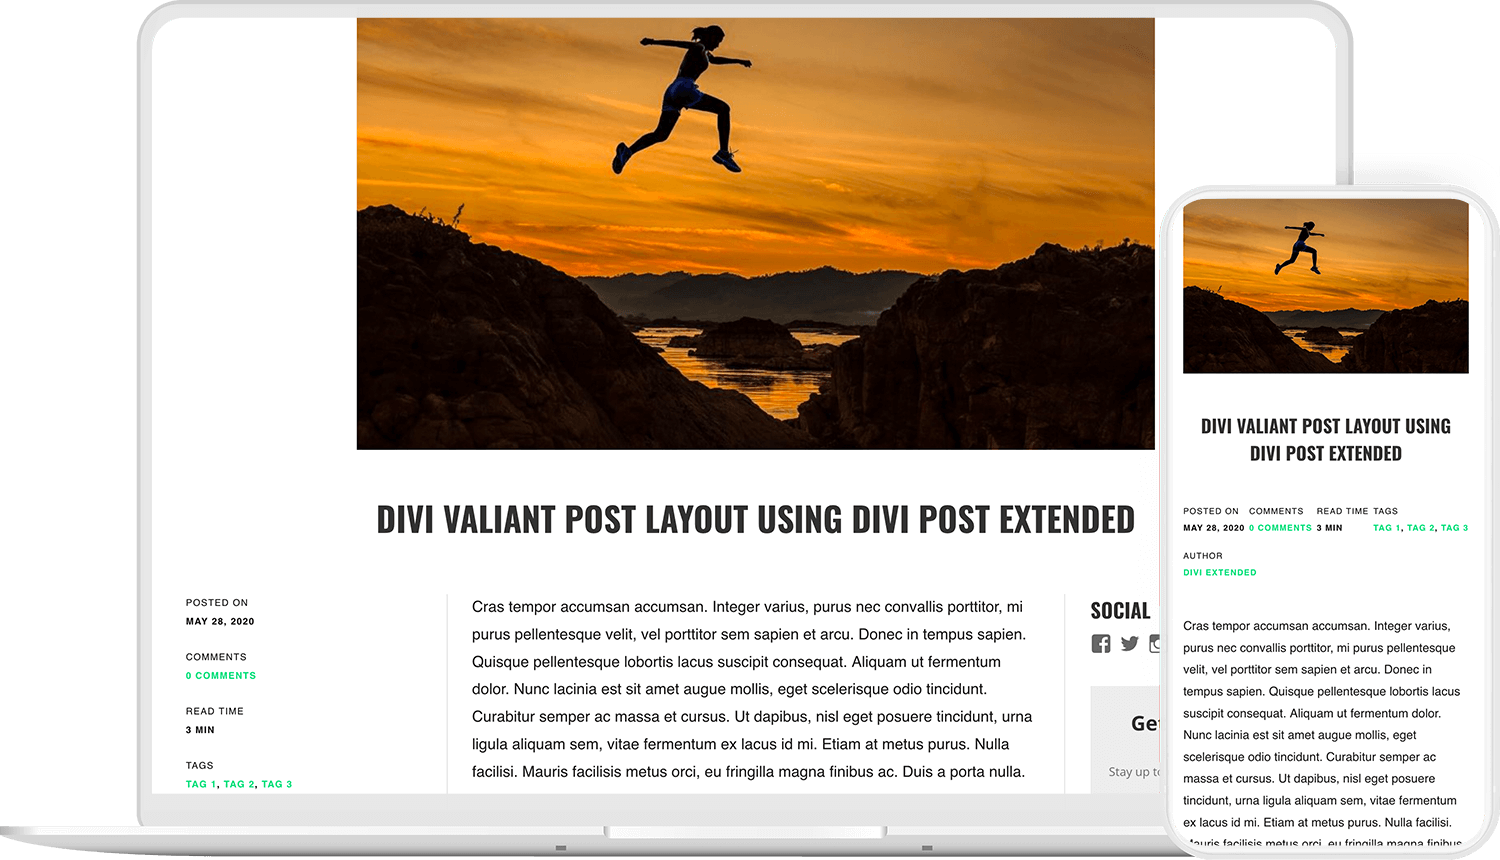 Divi Post Extended is a post layout plugin for Divi